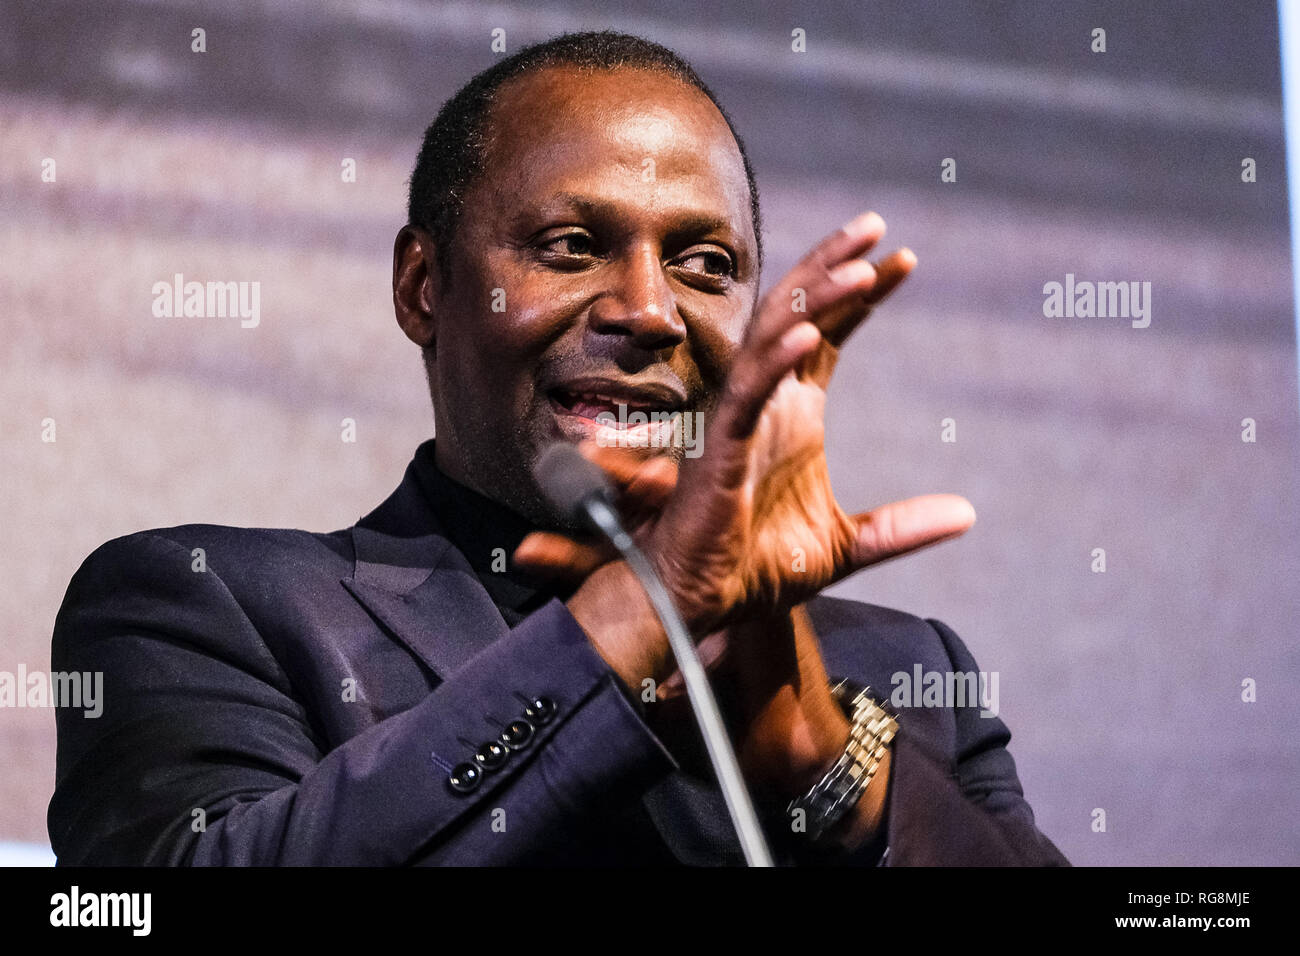 London, UK. 28th Jan, 2019. Cyril Nri on stage at Mark Kermode Live in 3D on Monday 28 January 2019 at BFI Southbank, London. Picture by Credit: Julie Edwards/Alamy Live News Stock Photo